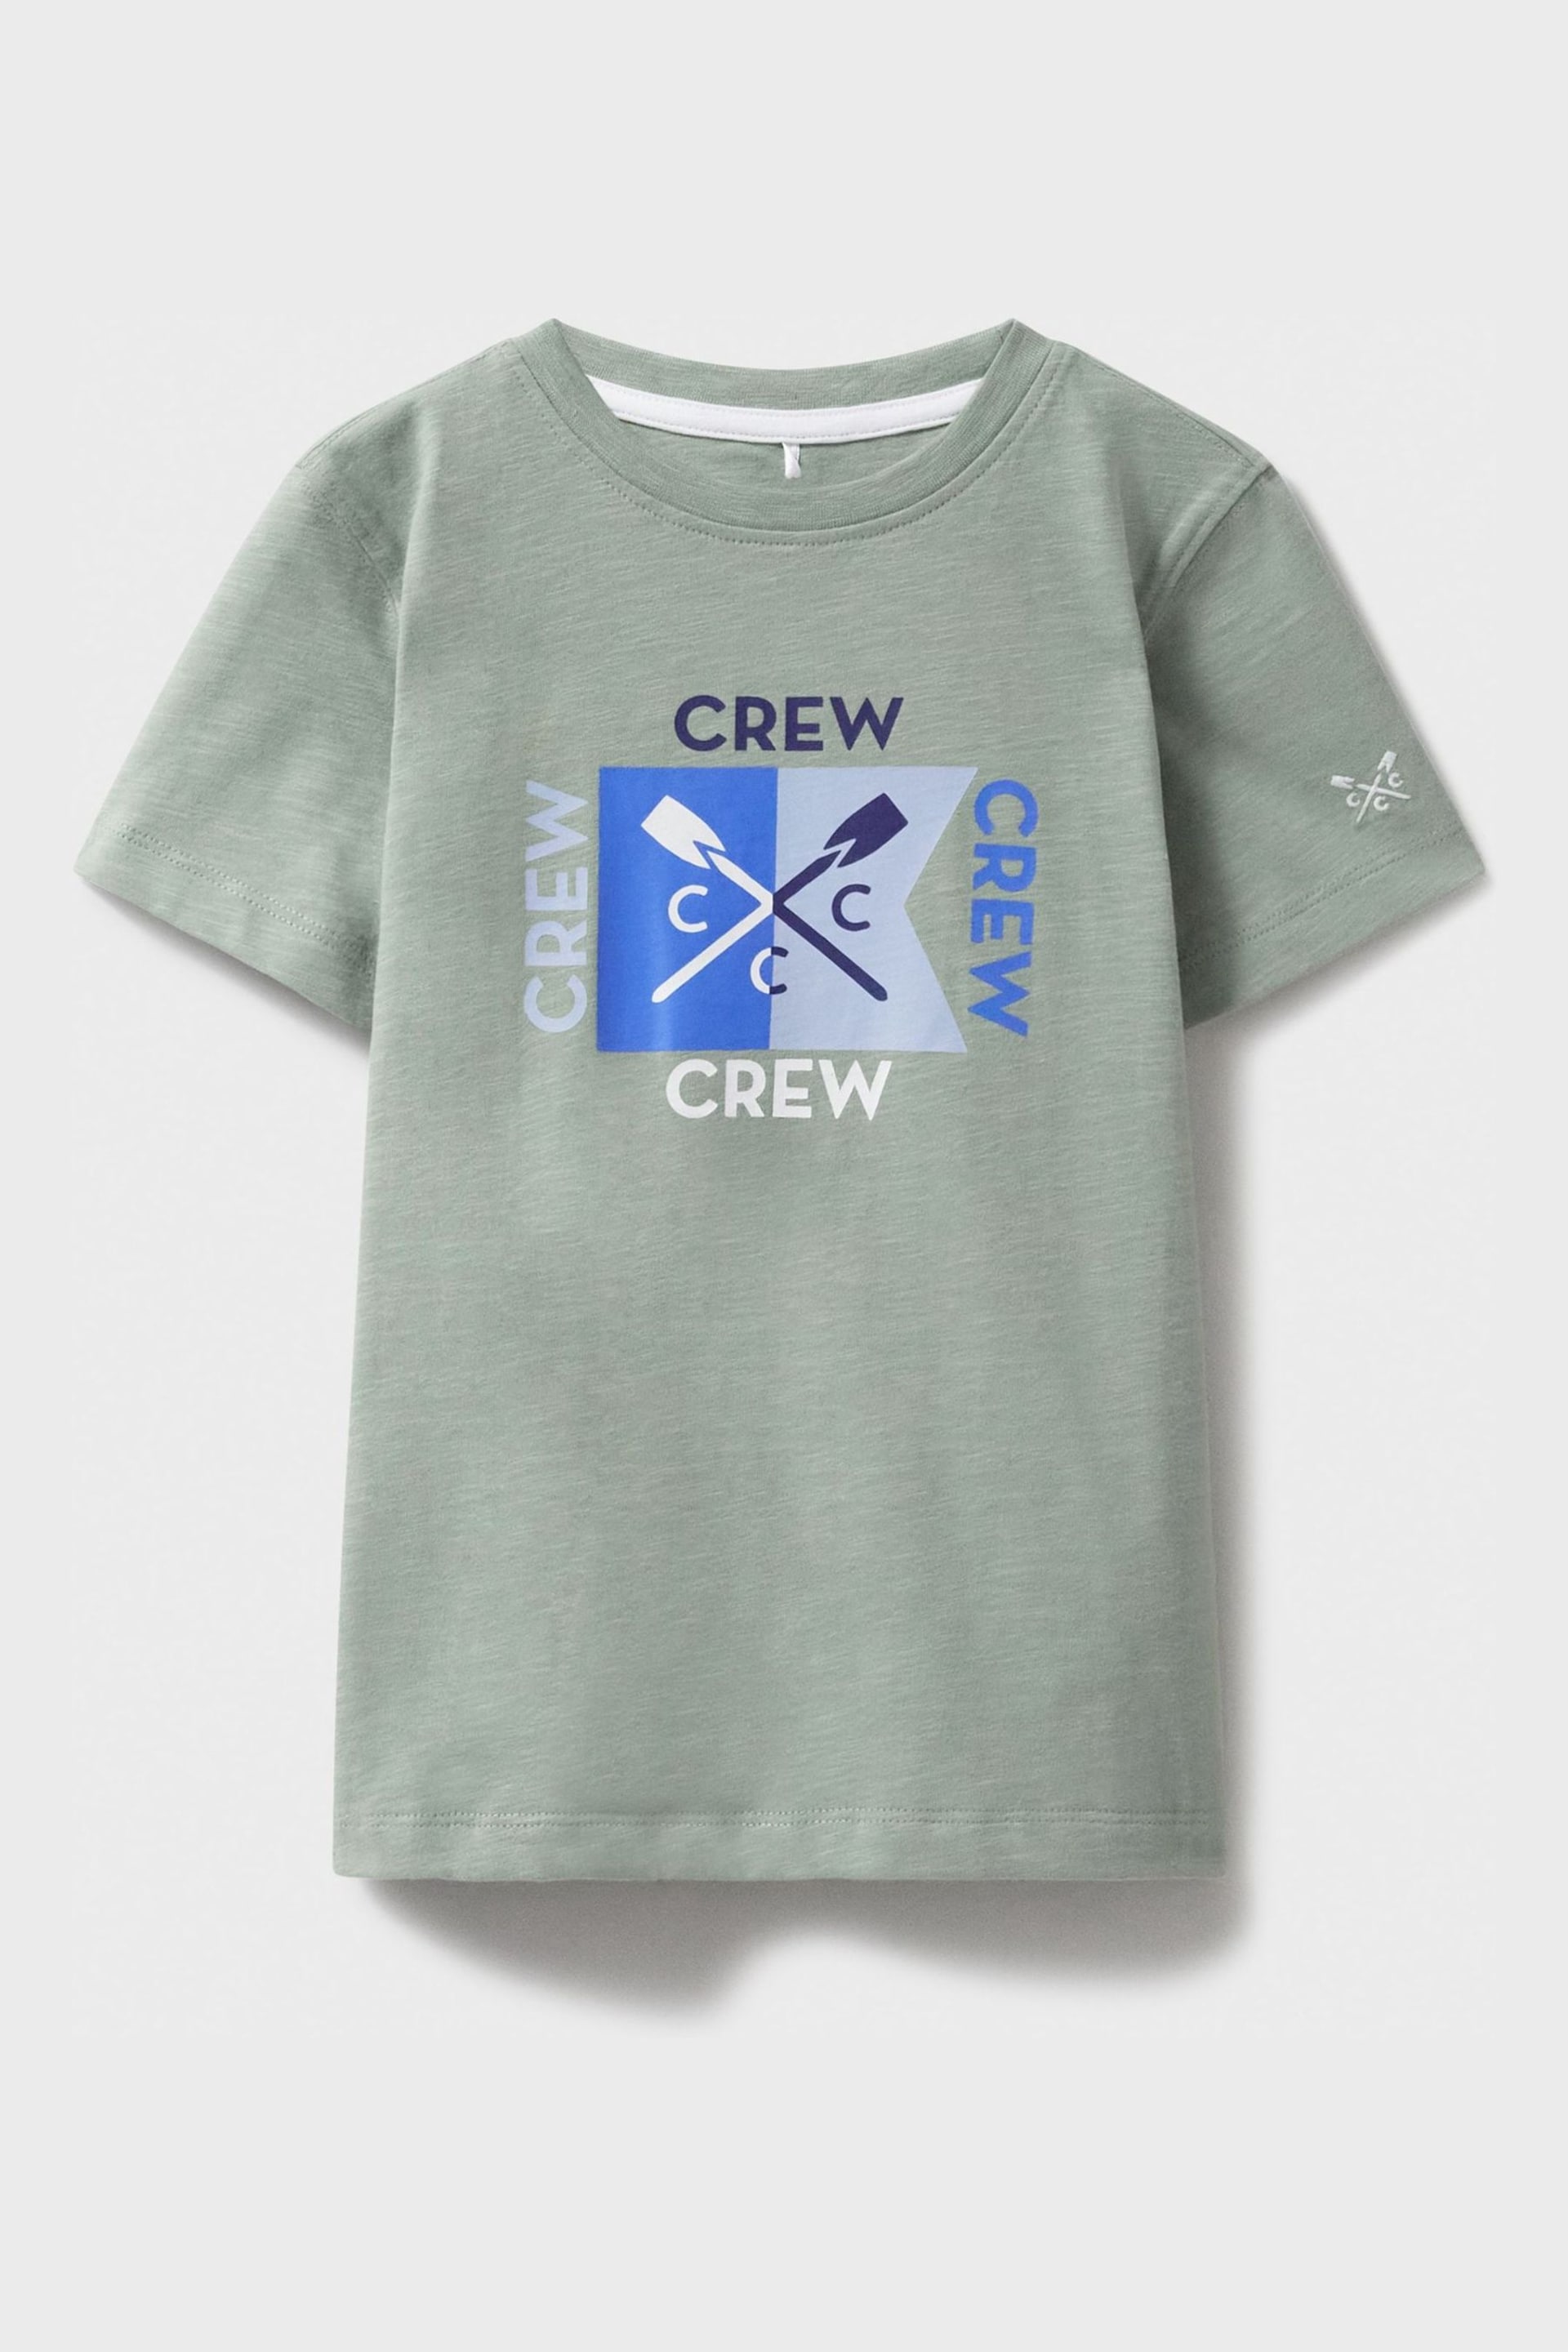 Crew Clothing Company Green Cotton Classic T-Shirt - Image 1 of 3